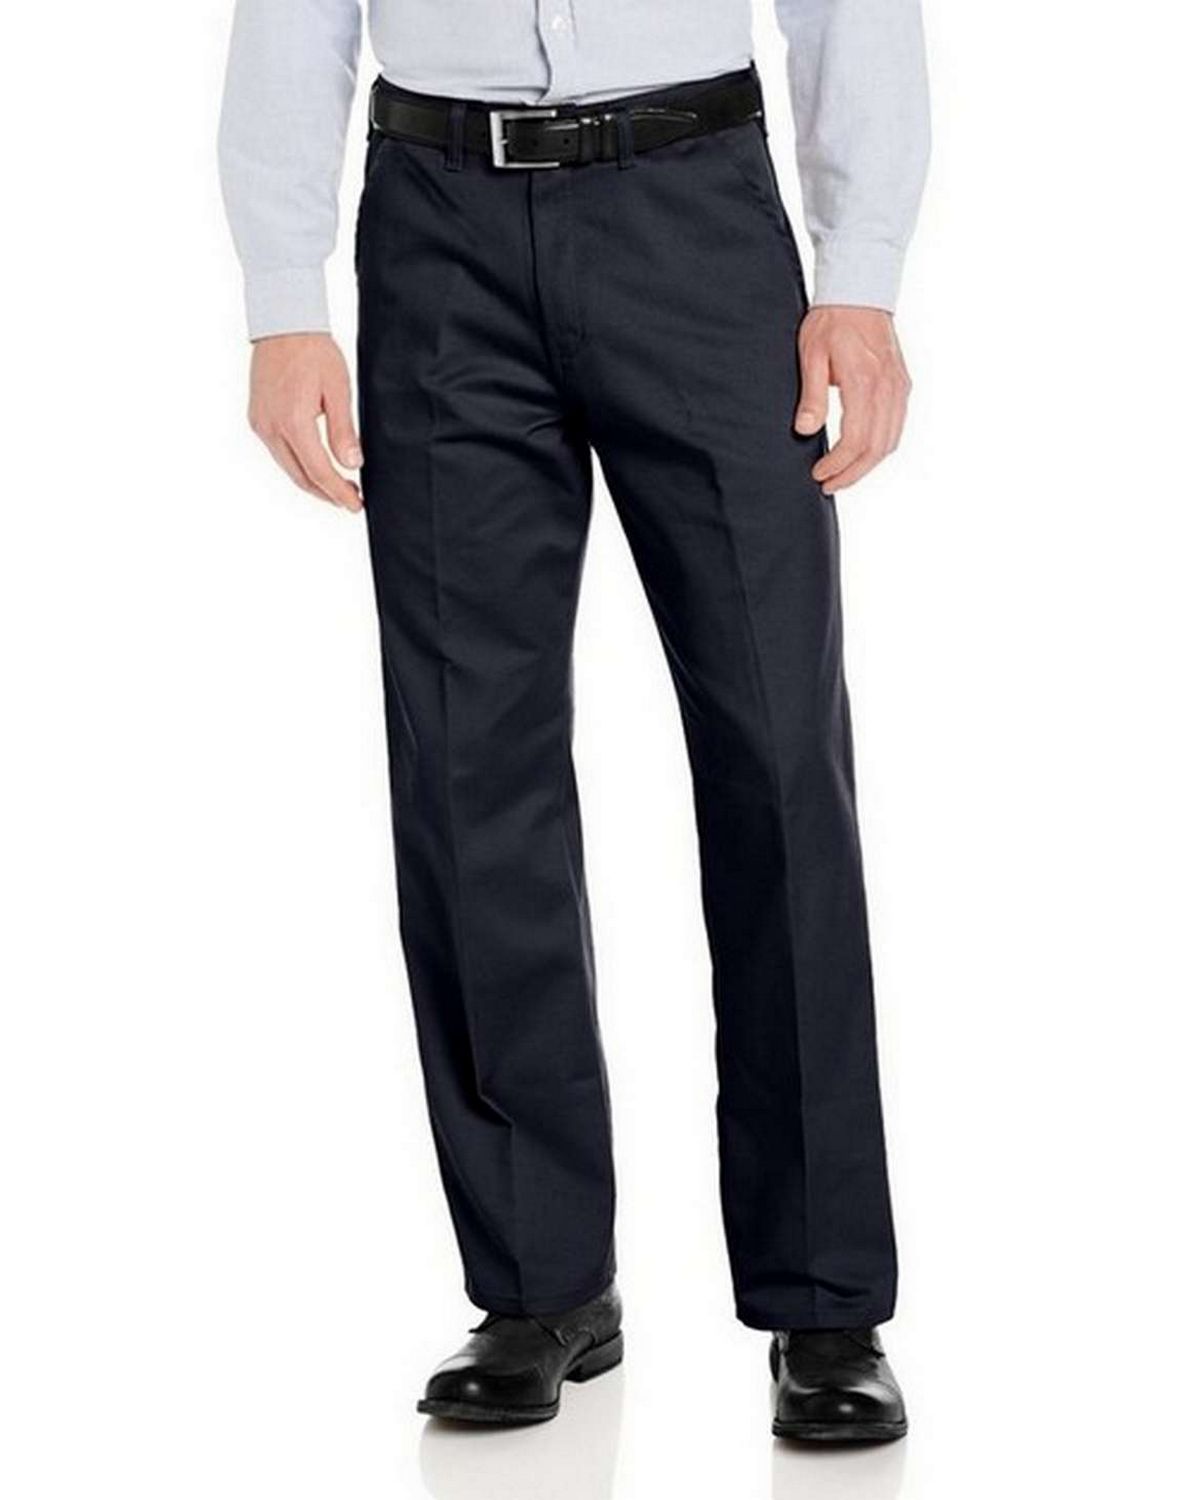 Dickies WP314 Relaxed Fit Cotton Flat Front Pant